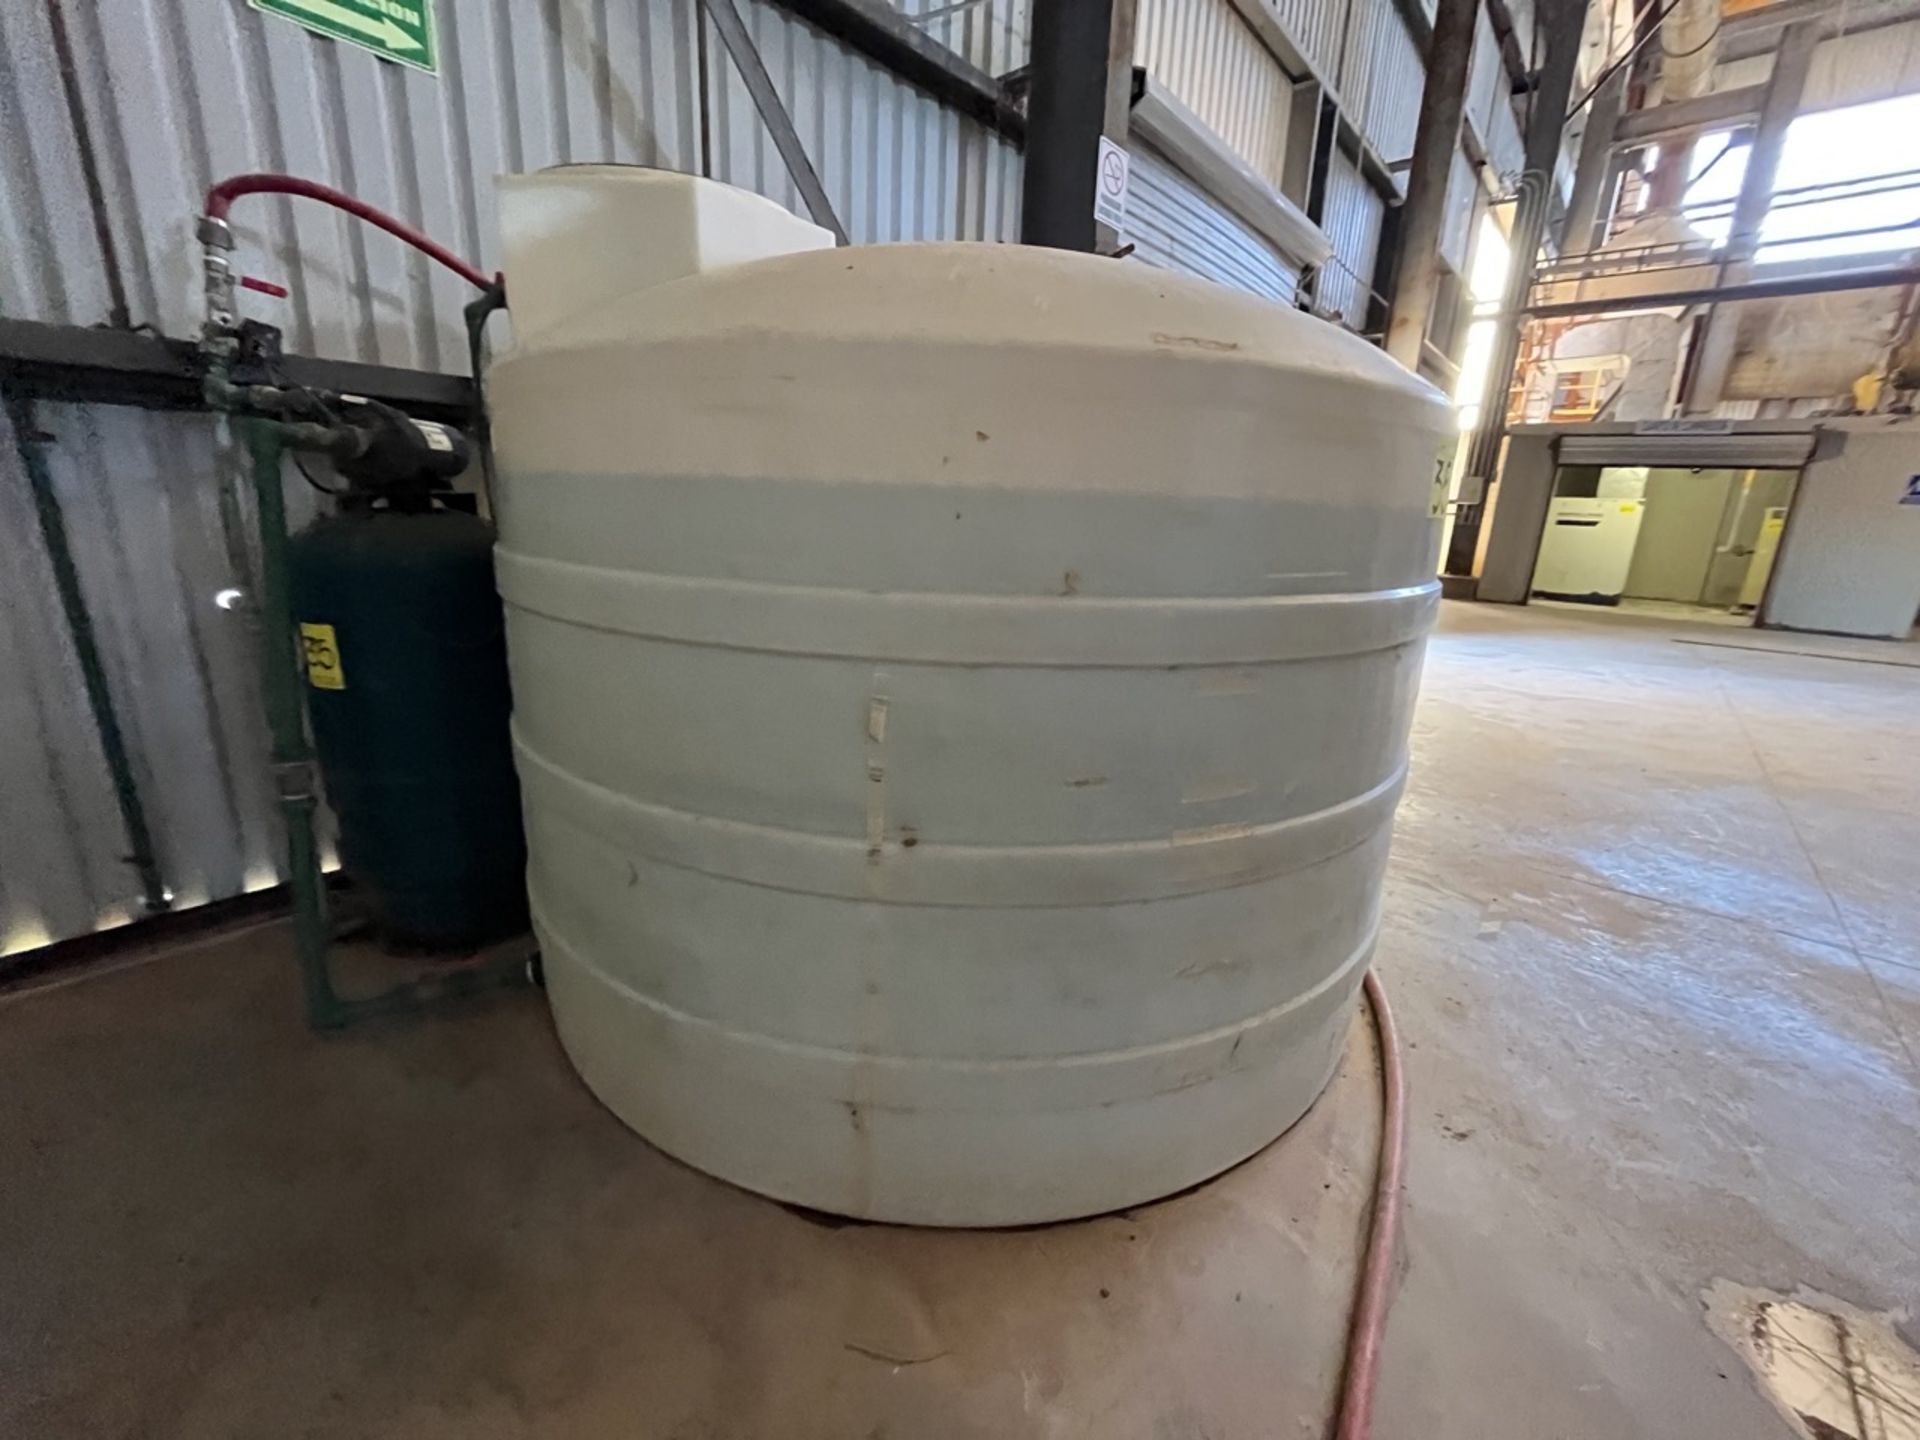 OASIS Water storage tank ,cistern type, capacity of 5 thousand liters approx, measures approx 2.10 - Image 4 of 16